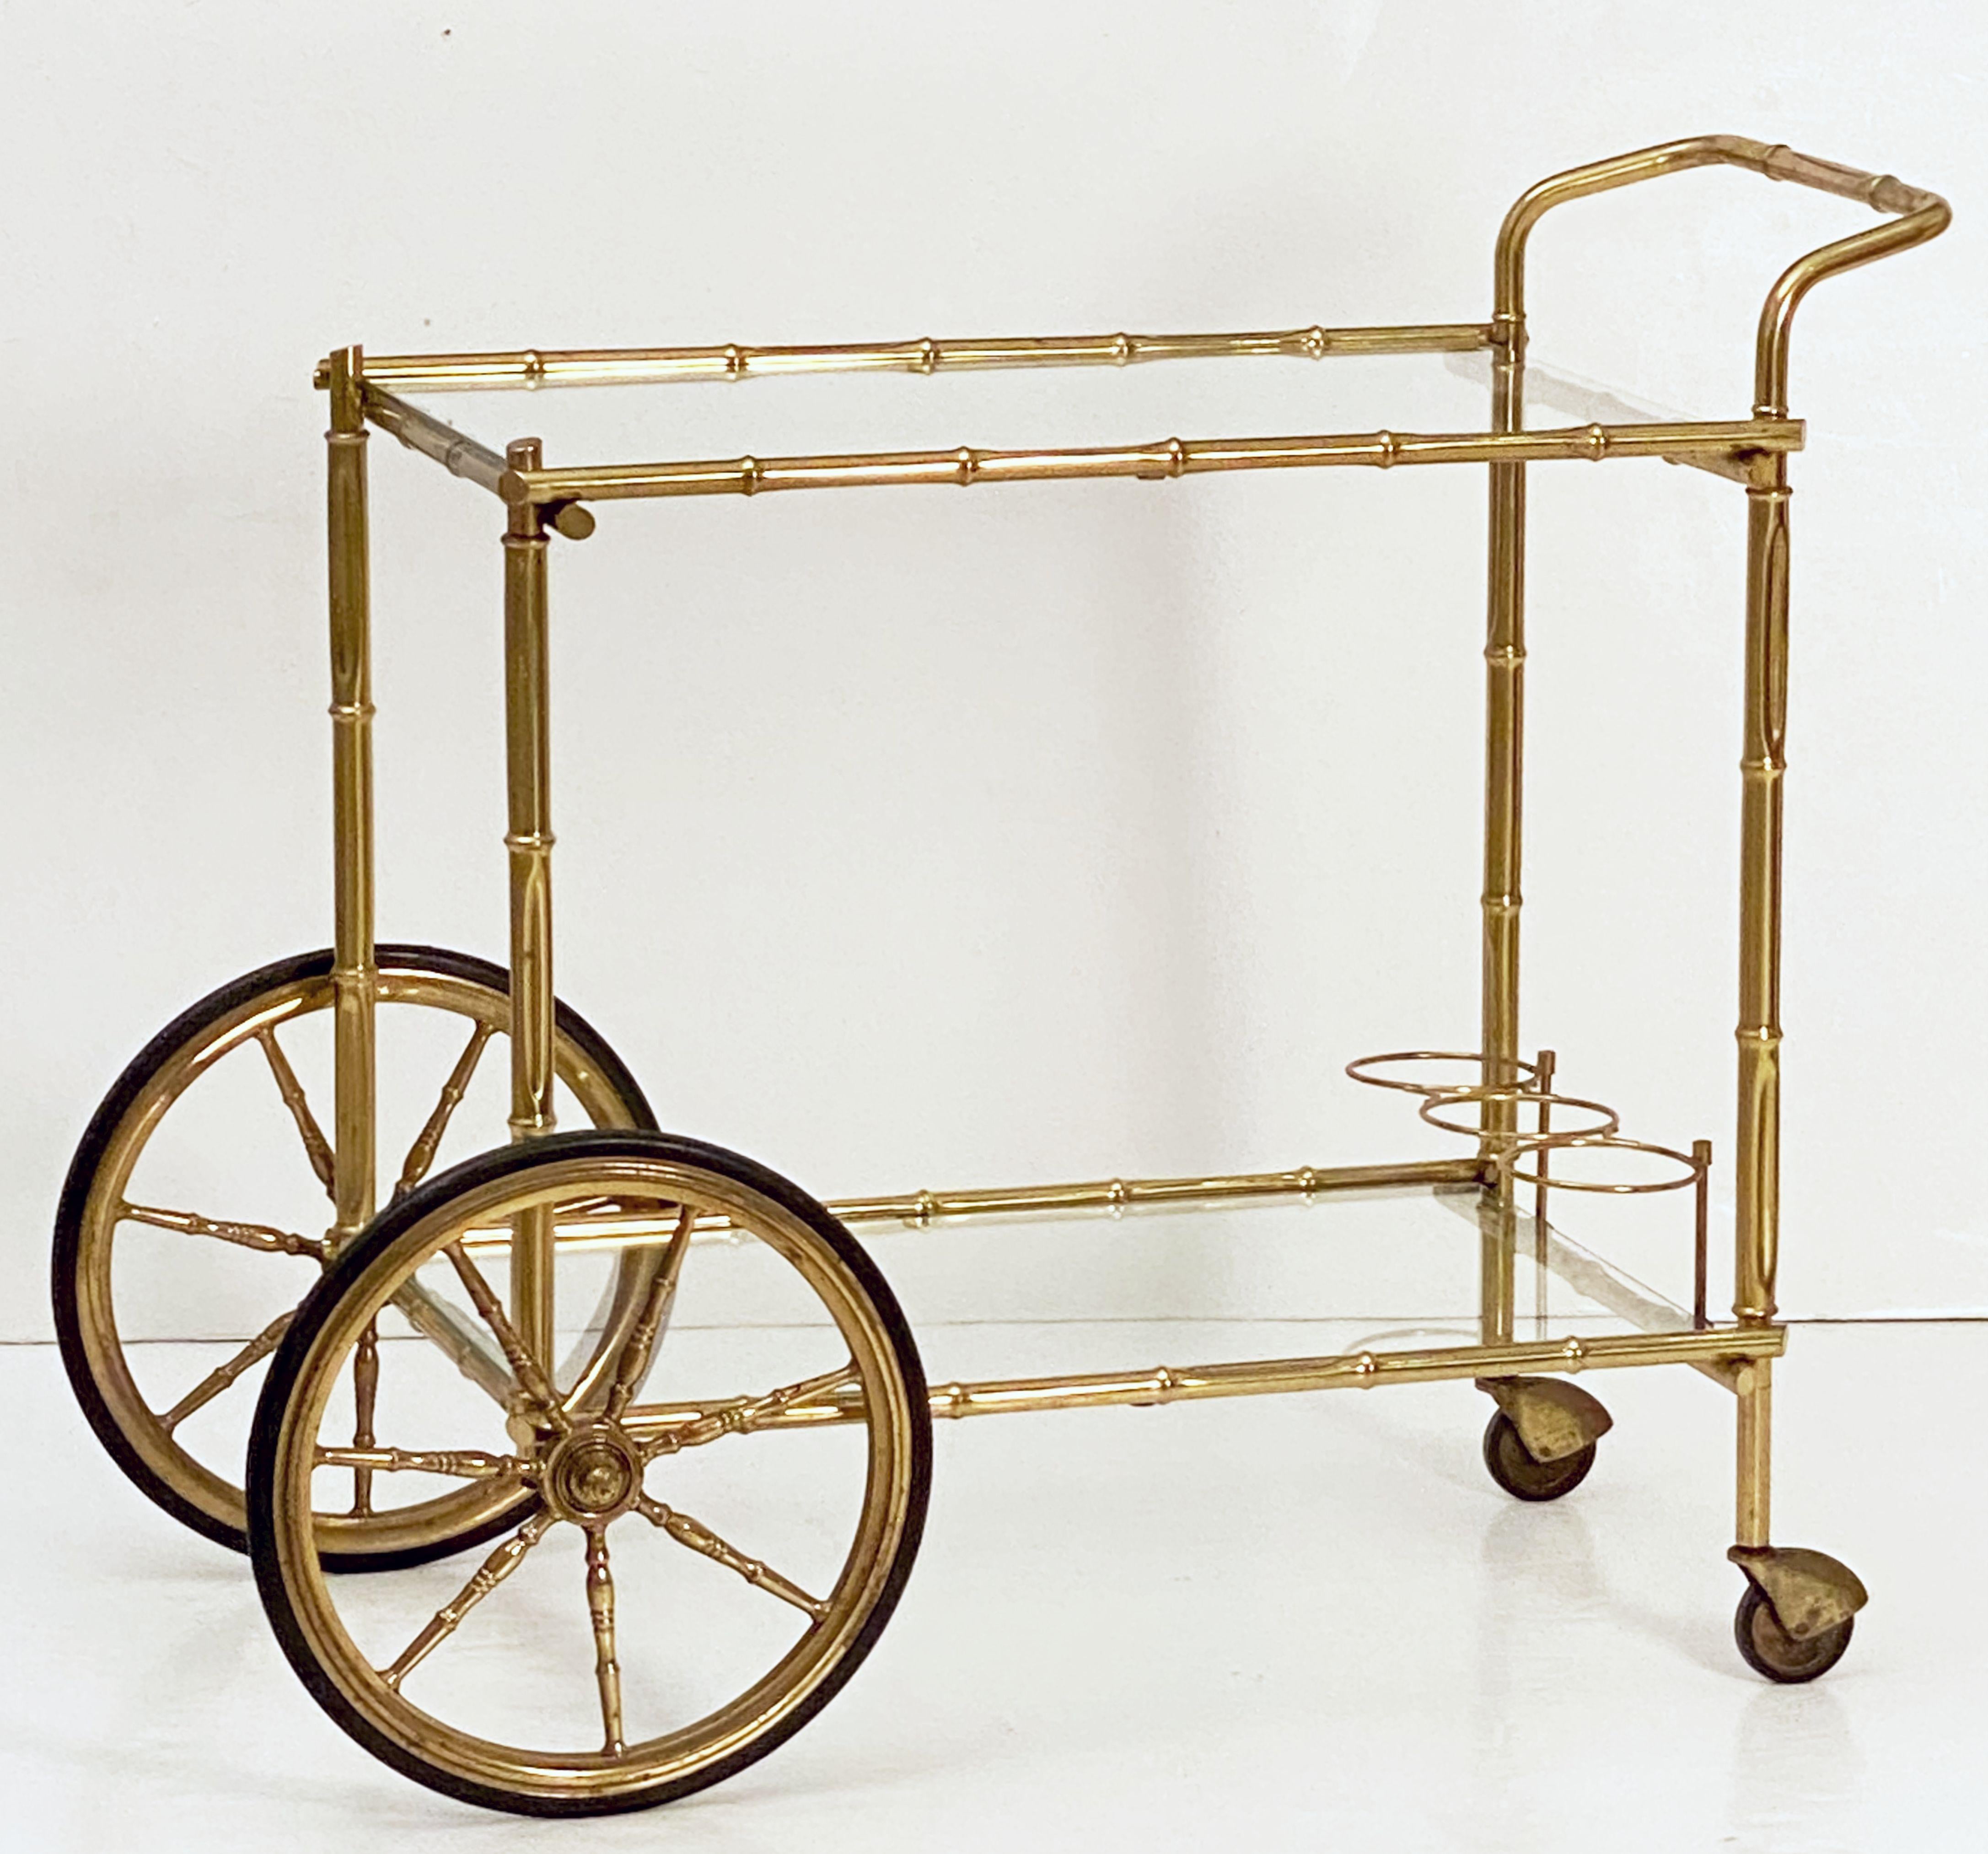 A handsome vintage French rectangular bar cart table or serving trolley in brass, featuring two glass tiers, with bottle rack on bottom tier, resting on rolling caster wheels. The larger back two wheels with a spoked design.

Perfect for use as a